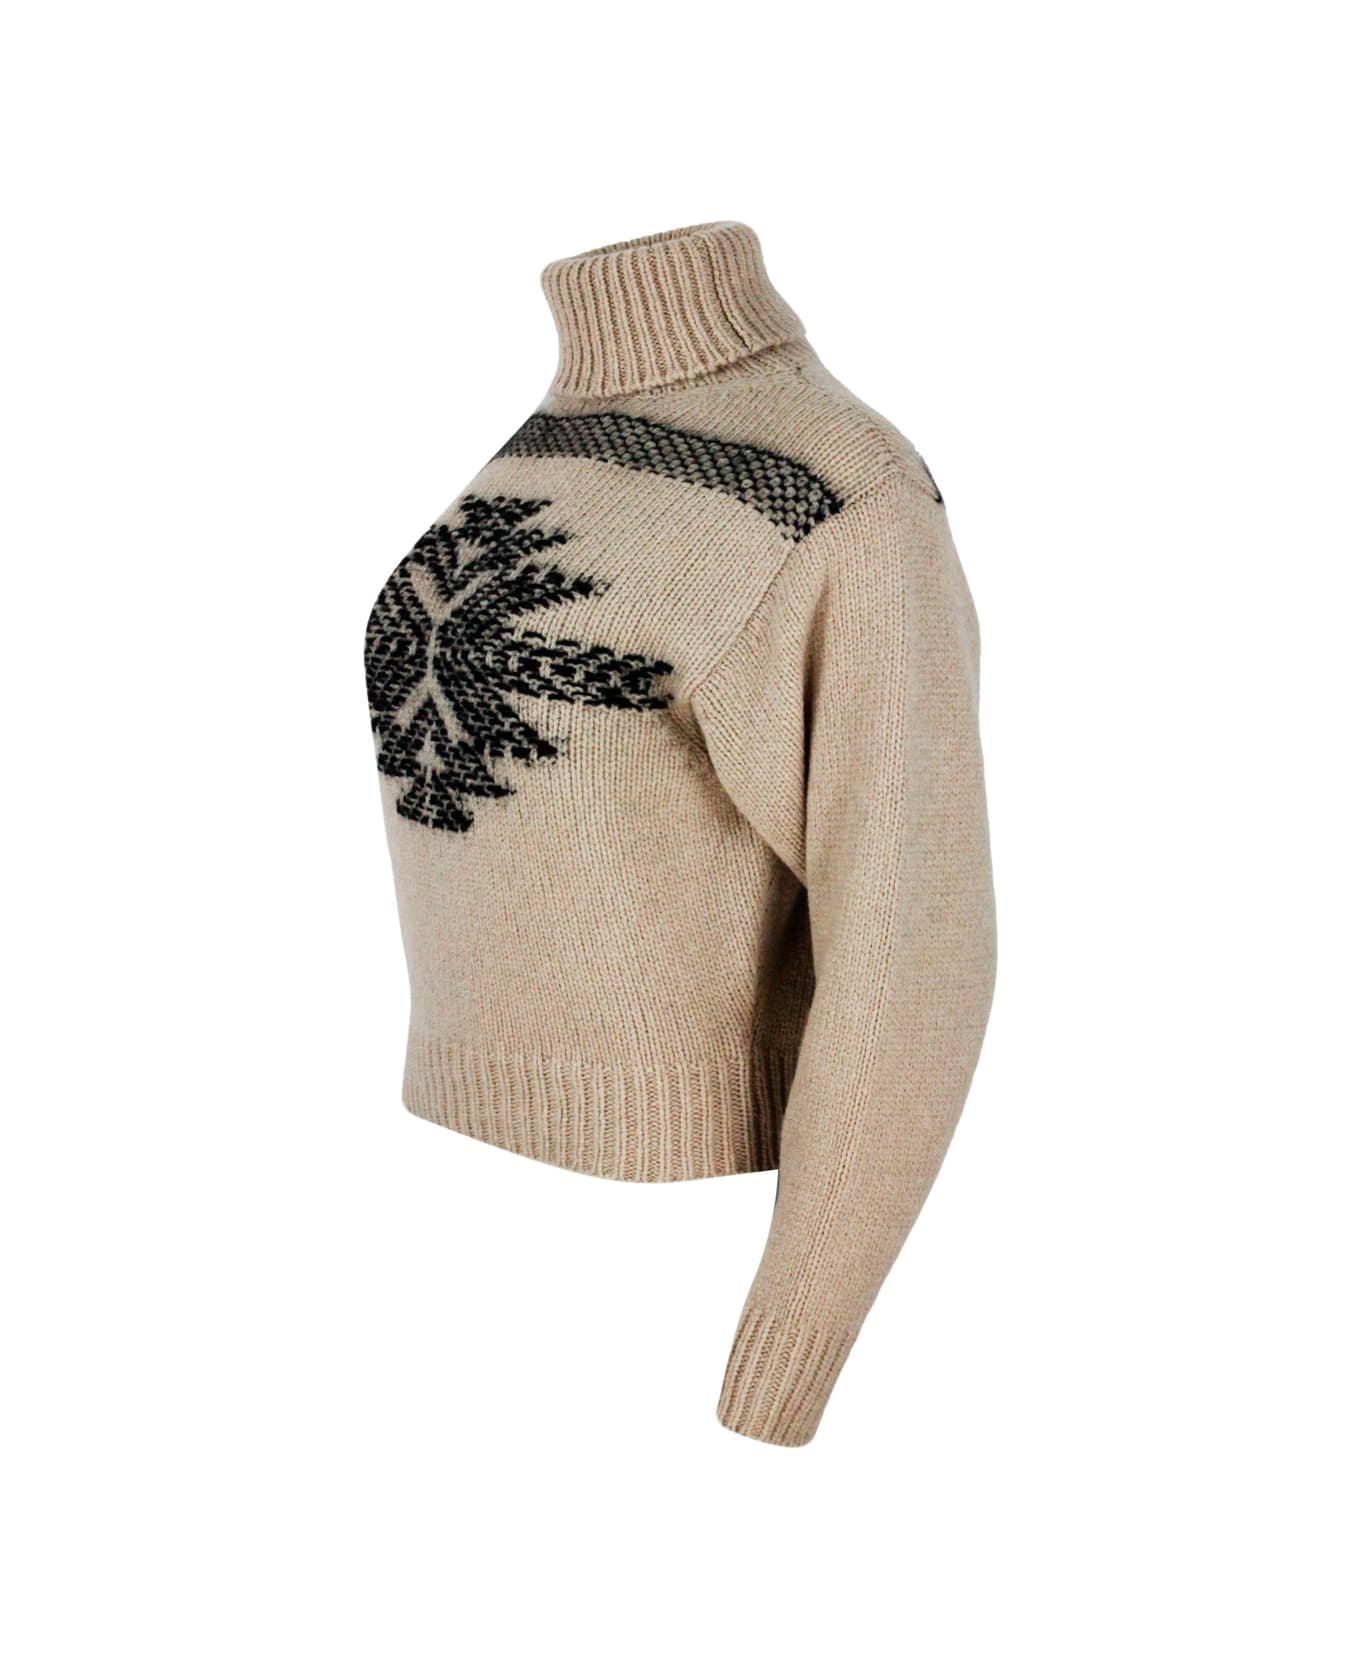 Lorena Antoniazzi Turtleneck Sweater In Fine Camel Yarn With Snow Play Embroidery Embellished With Micro Sequins - Beige